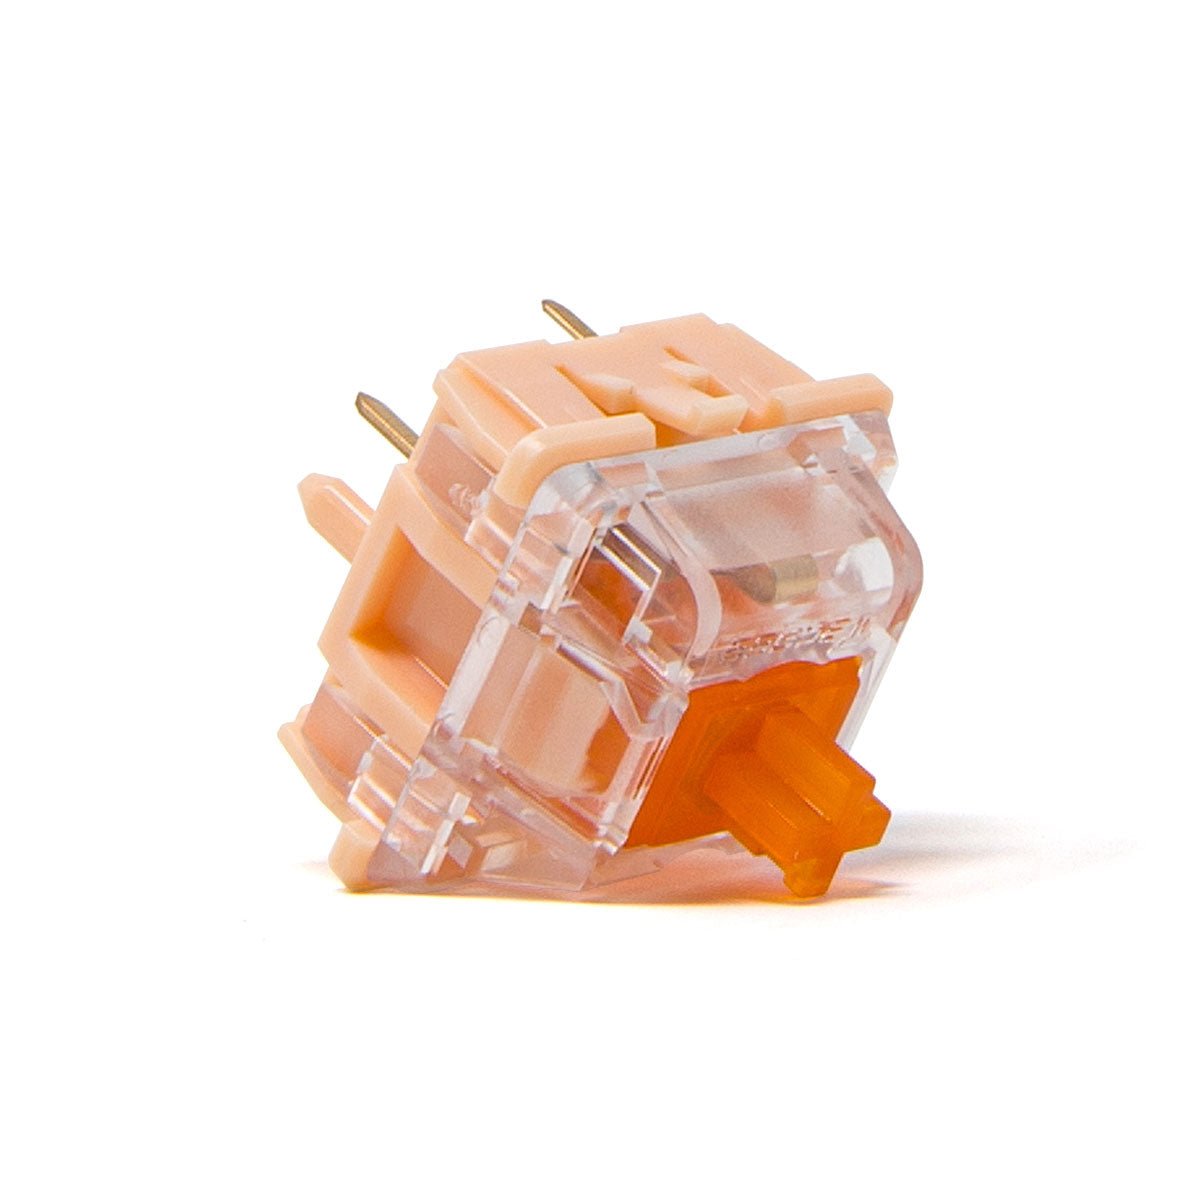 Tecsee Coral Tactile Switches - Divinikey